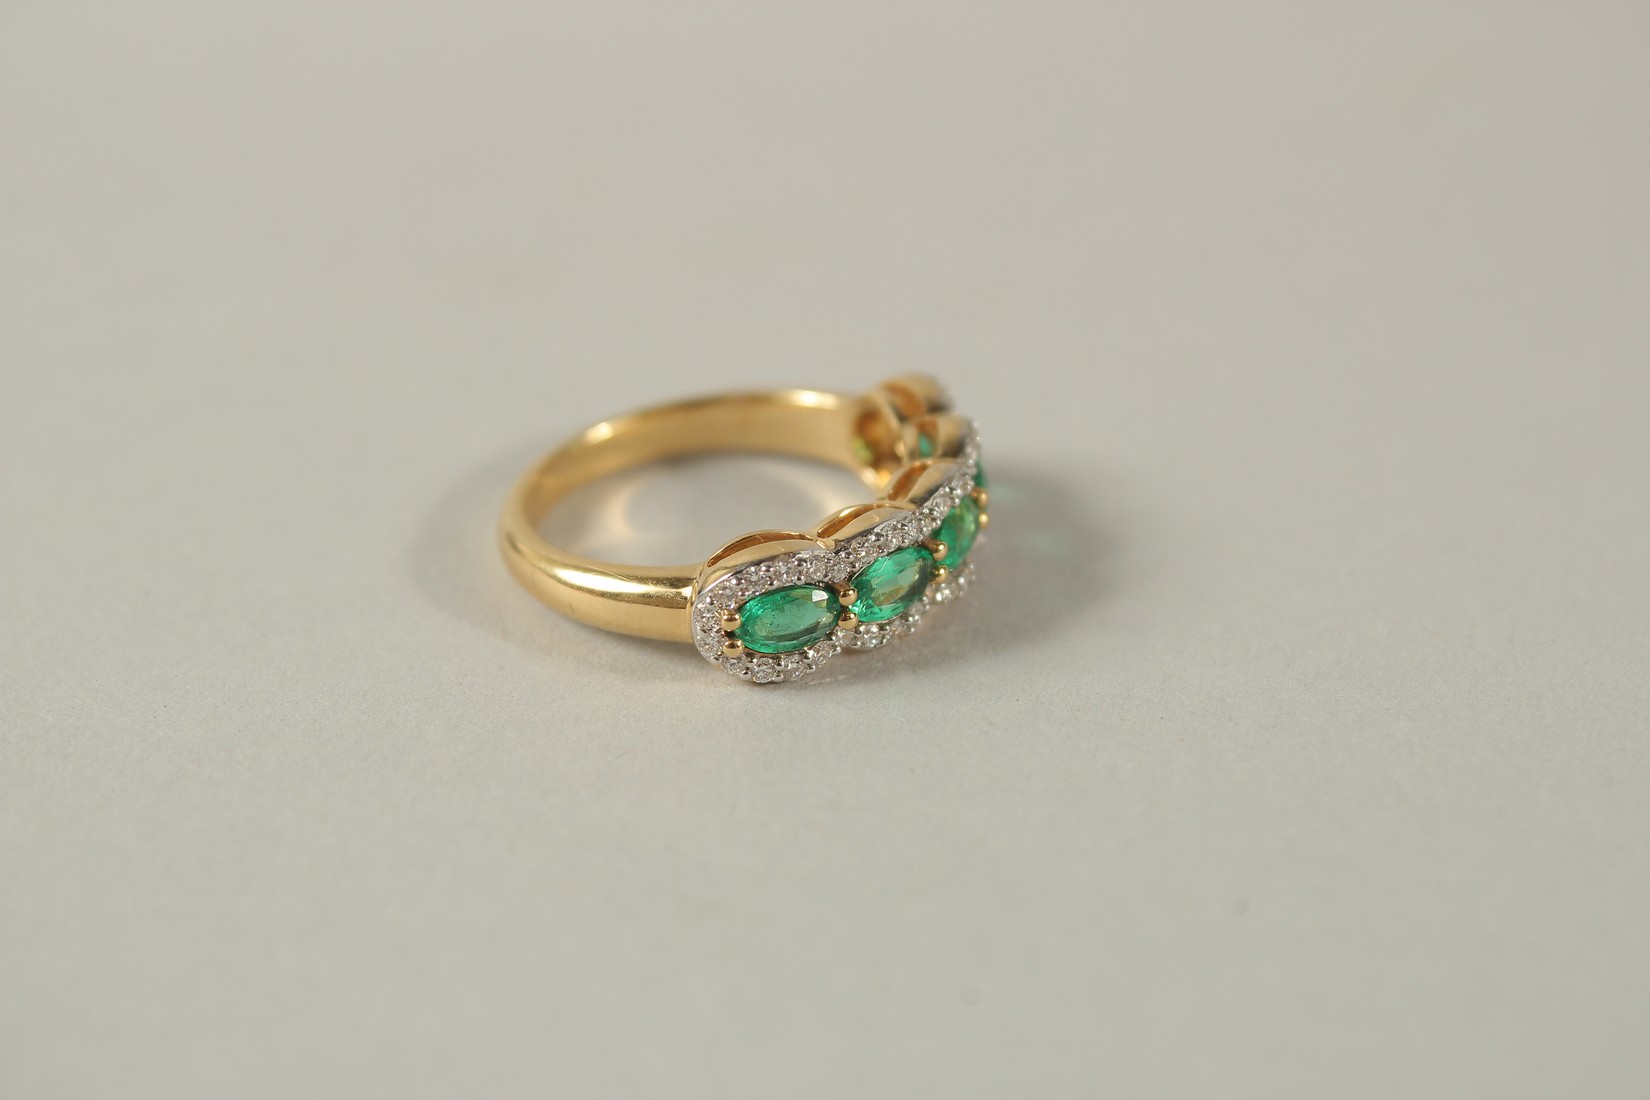 AN 18CT YELLOW GOLD FIVE STONE EMERALD AND DIAMOND HALF HOOP RING. - Image 3 of 7